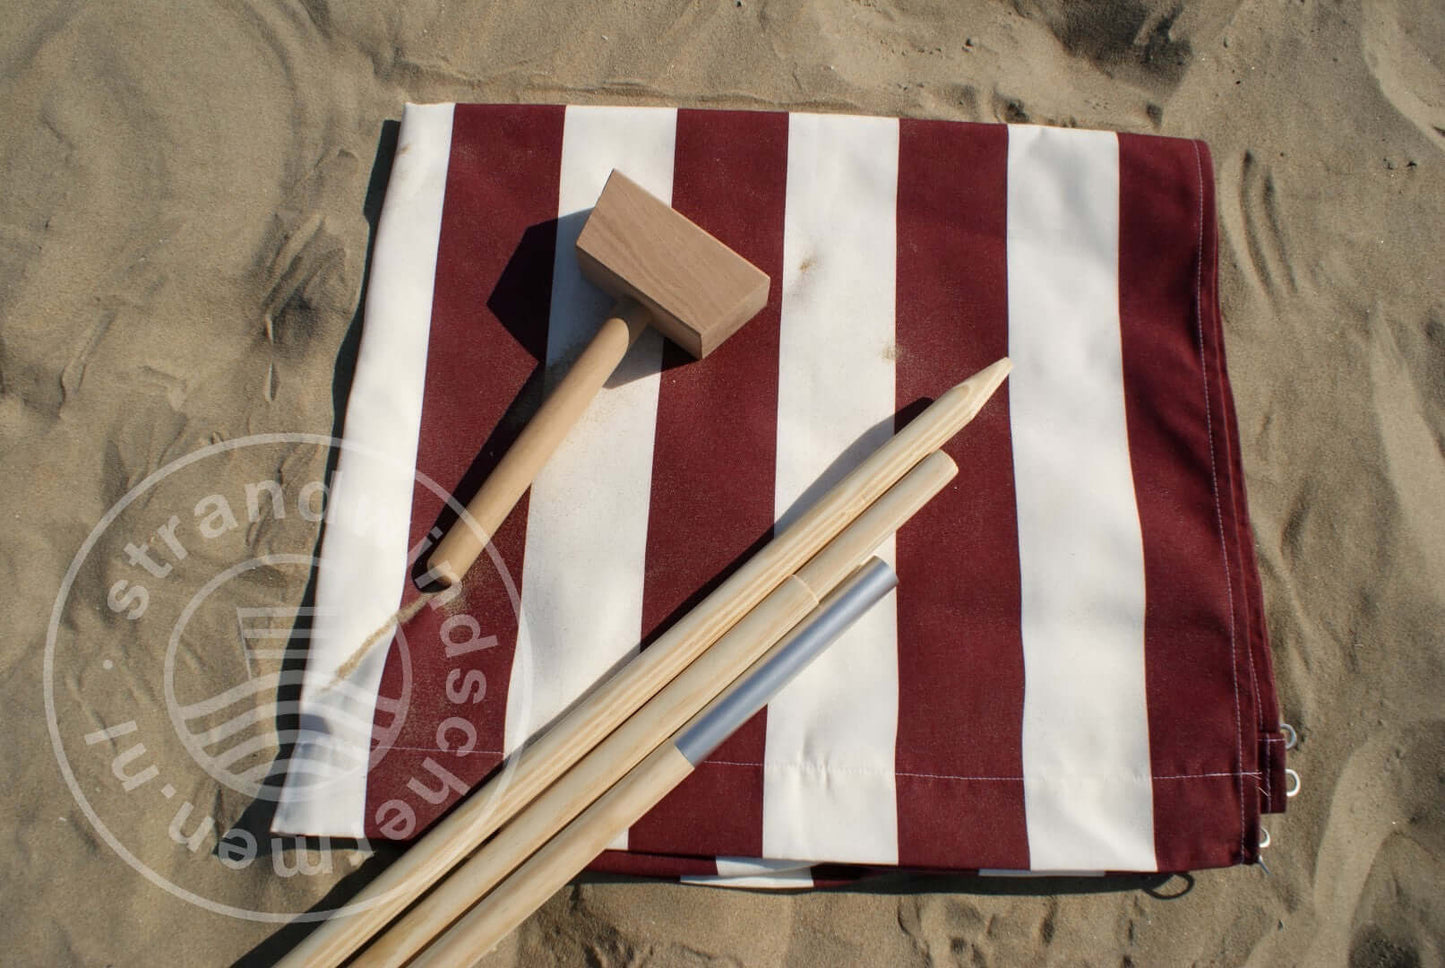 Divisible wooden Windbreaker stick 4 pieces